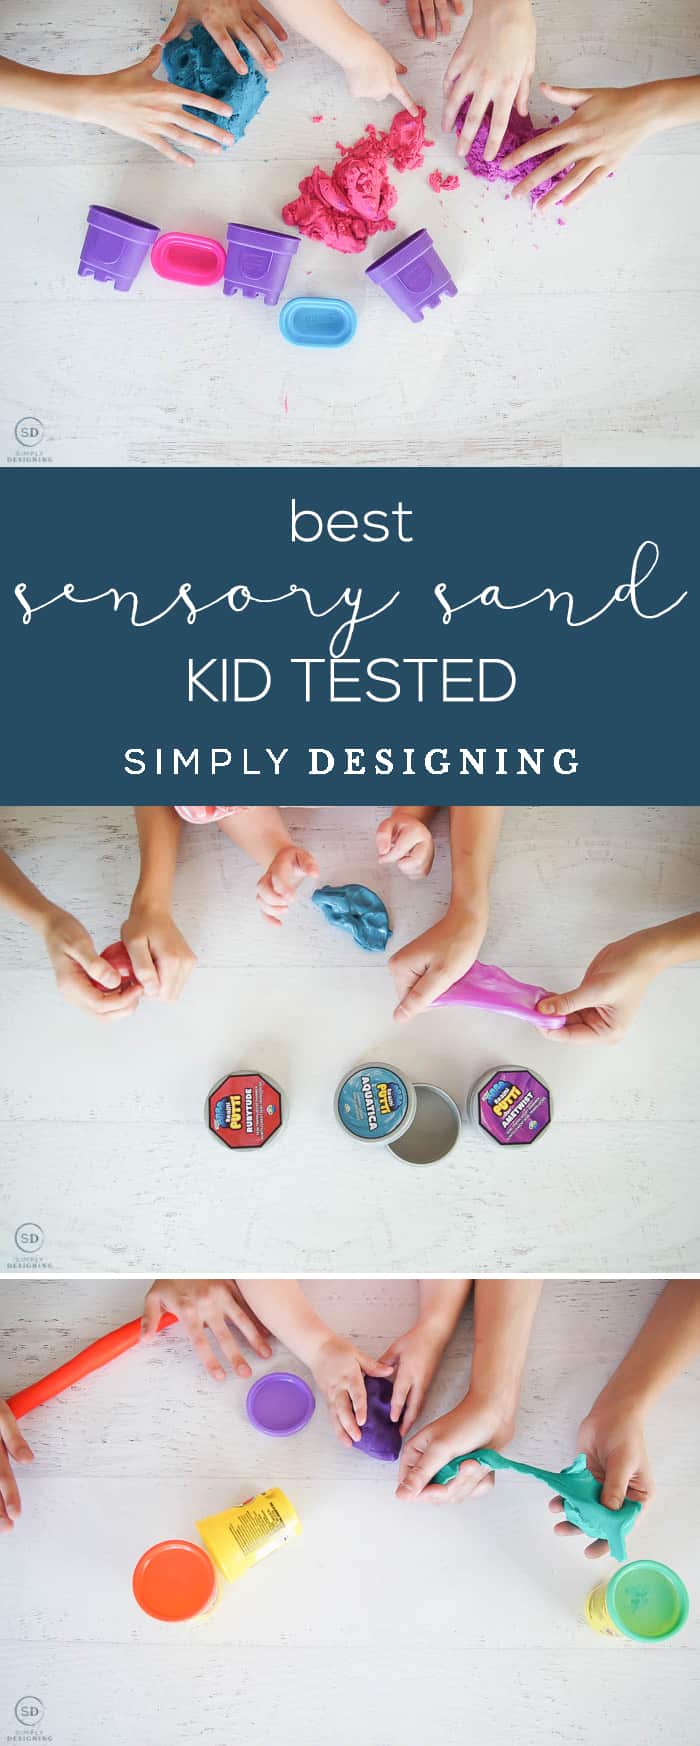 The BEST Sensory Sand - Kid Tested - kinetic sand vs slime vs putti vs play doh - which is squishiest messiest and overall best